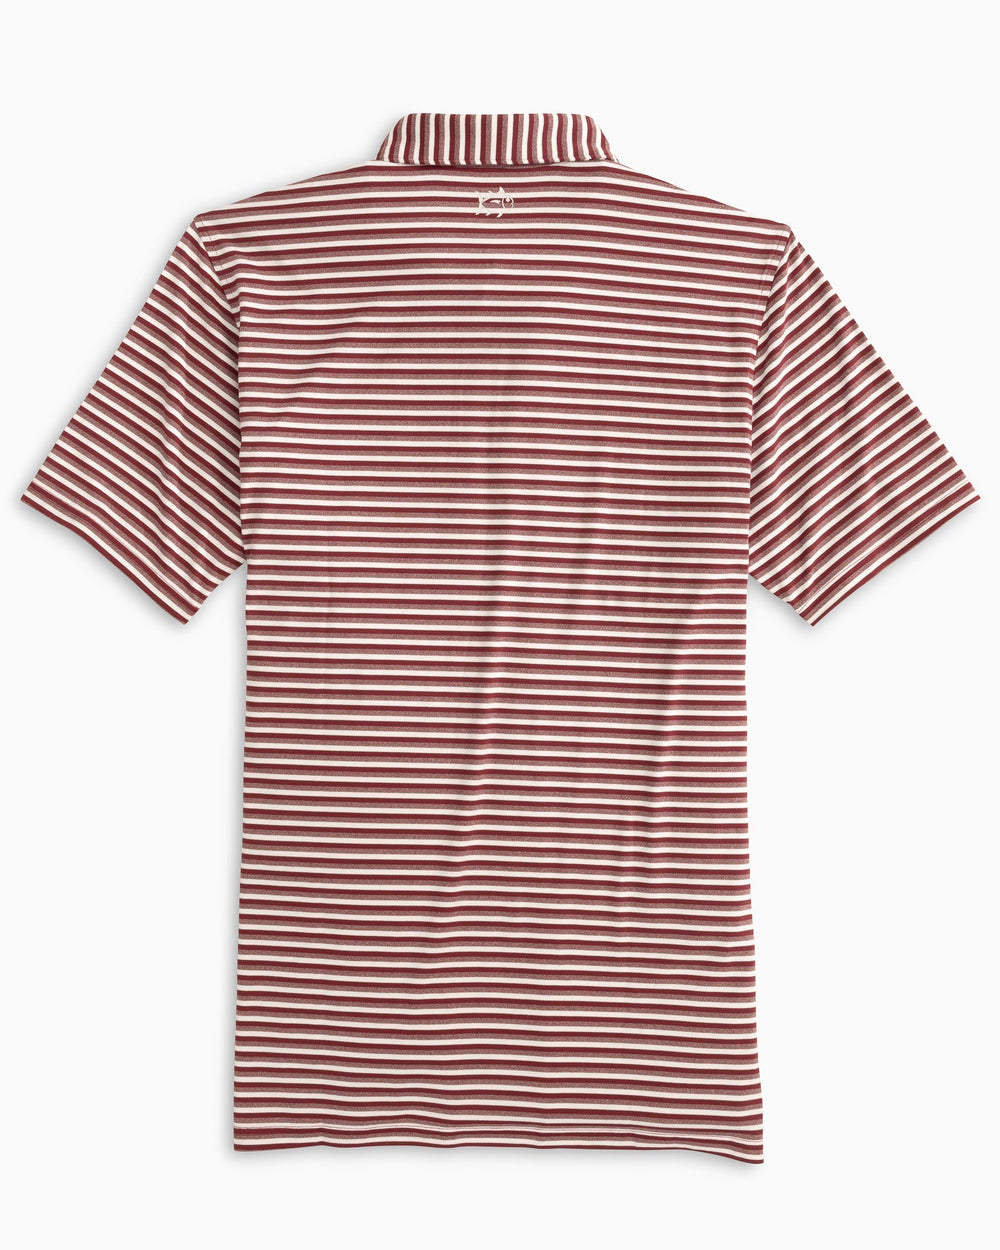 The back of the Men's Texas A&M Aggies Heathered Striped Performance Polo Shirt - Chianti